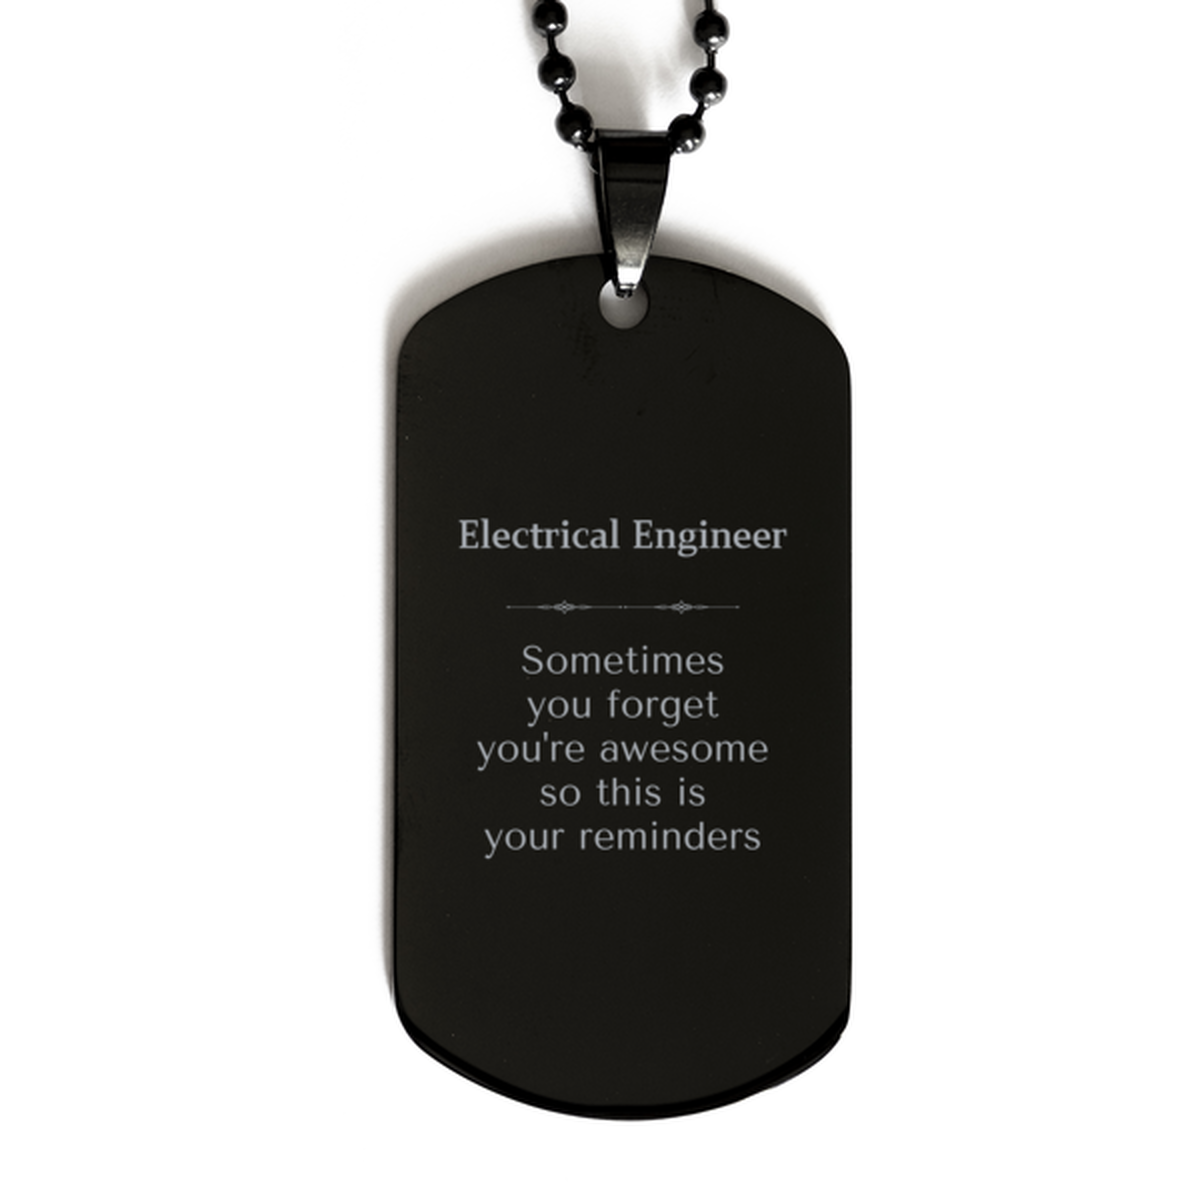 Sentimental Electrical Engineer Black Dog Tag, Electrical Engineer Sometimes you forget you're awesome so this is your reminders, Graduation Christmas Birthday Gifts for Electrical Engineer, Men, Women, Coworkers